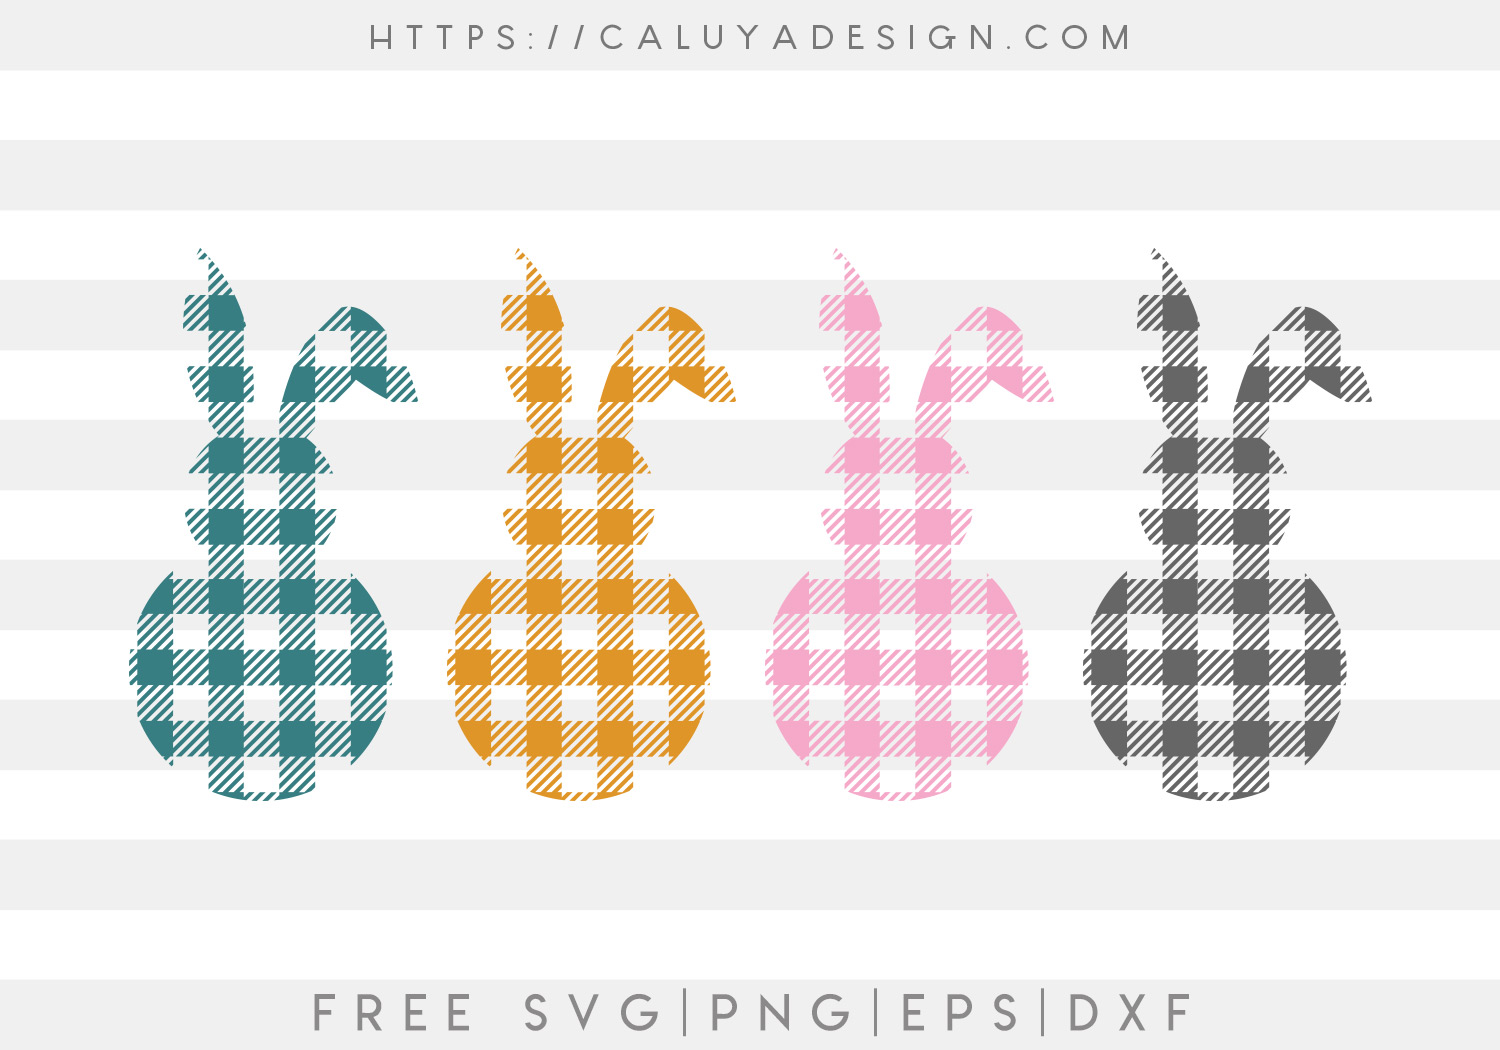 Plaid Bunny SVG, PNG, EPS & DXF